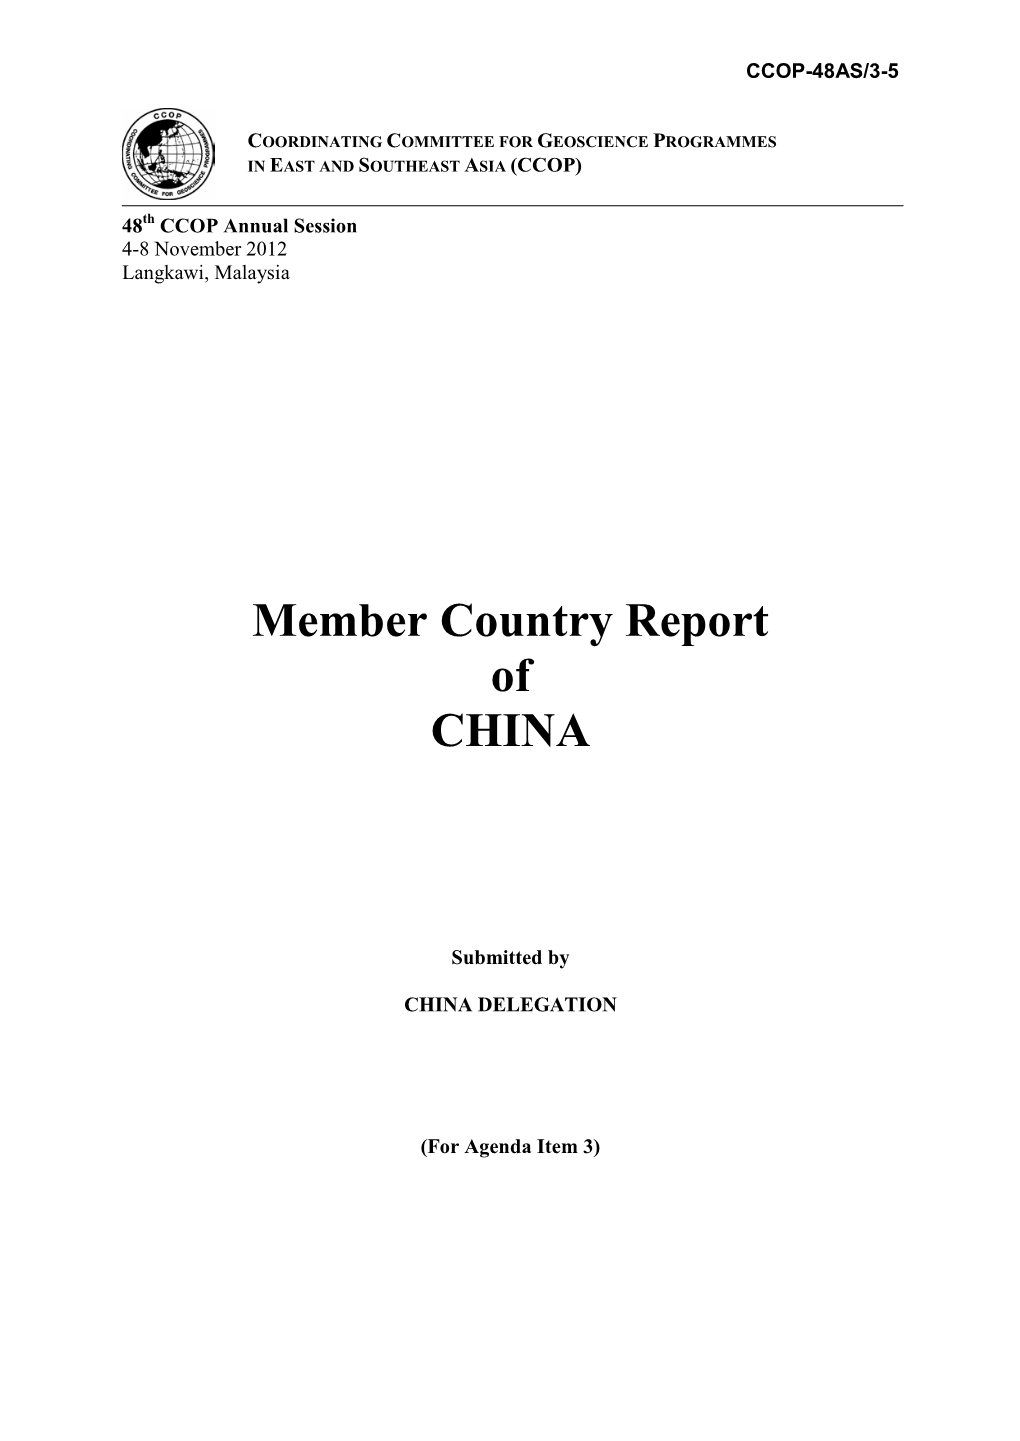 Member Country Report of CHINA